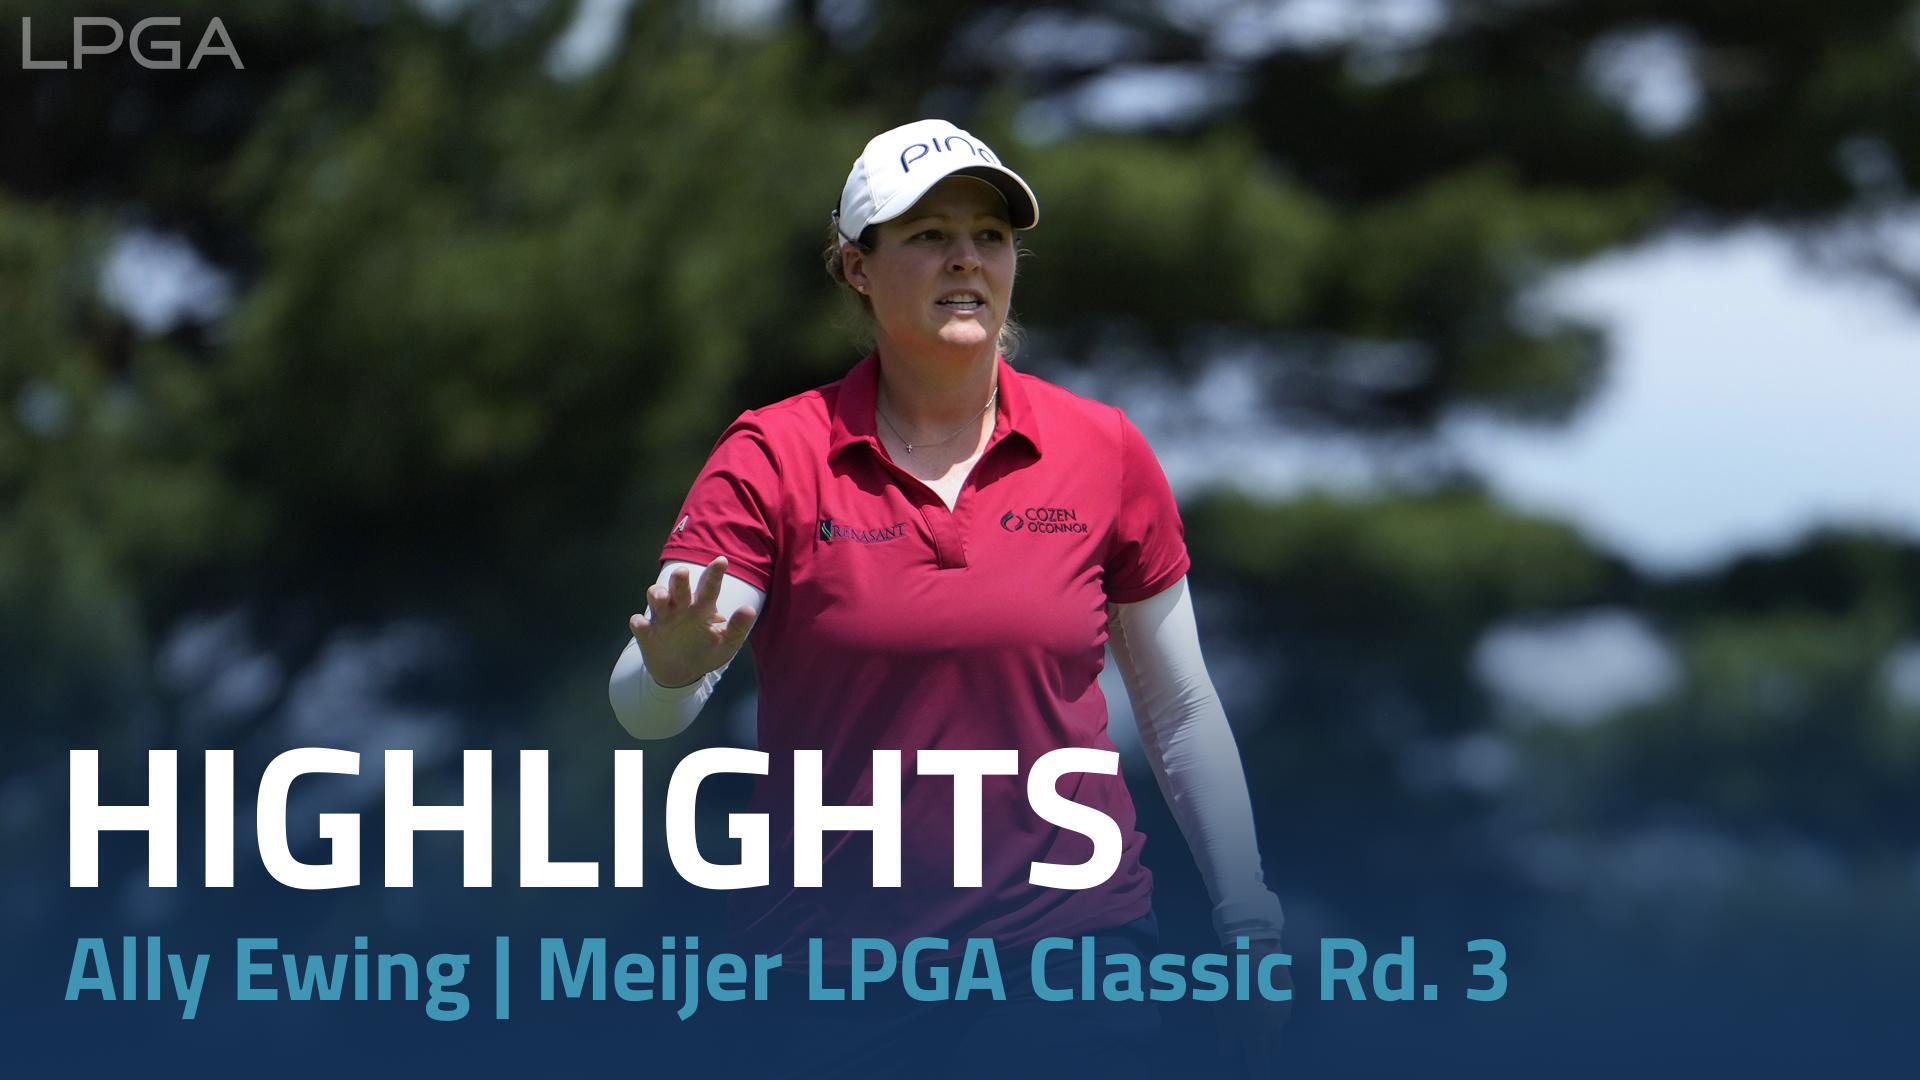 Ally Ewing Round 3 Highlights | Meijer LPGA Classic for Simply Give